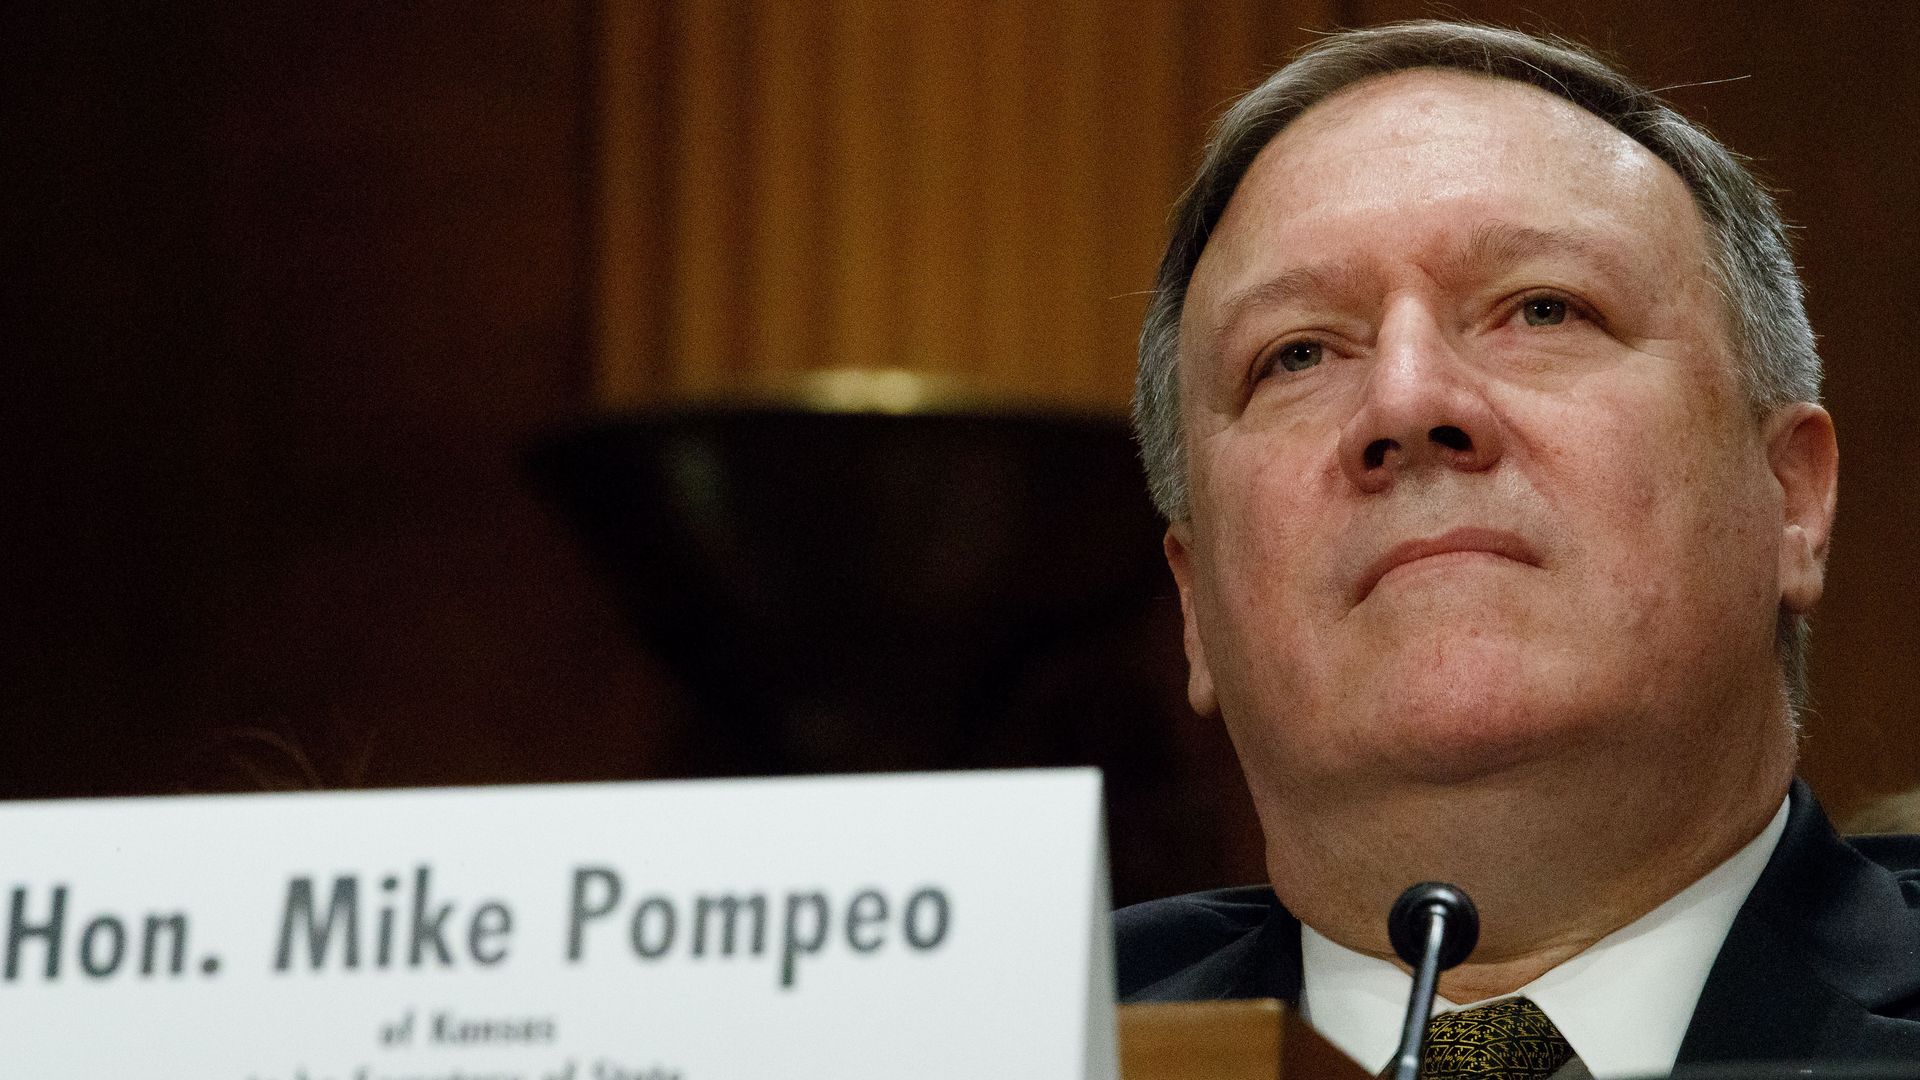 Pompeo at his confirmation hearing